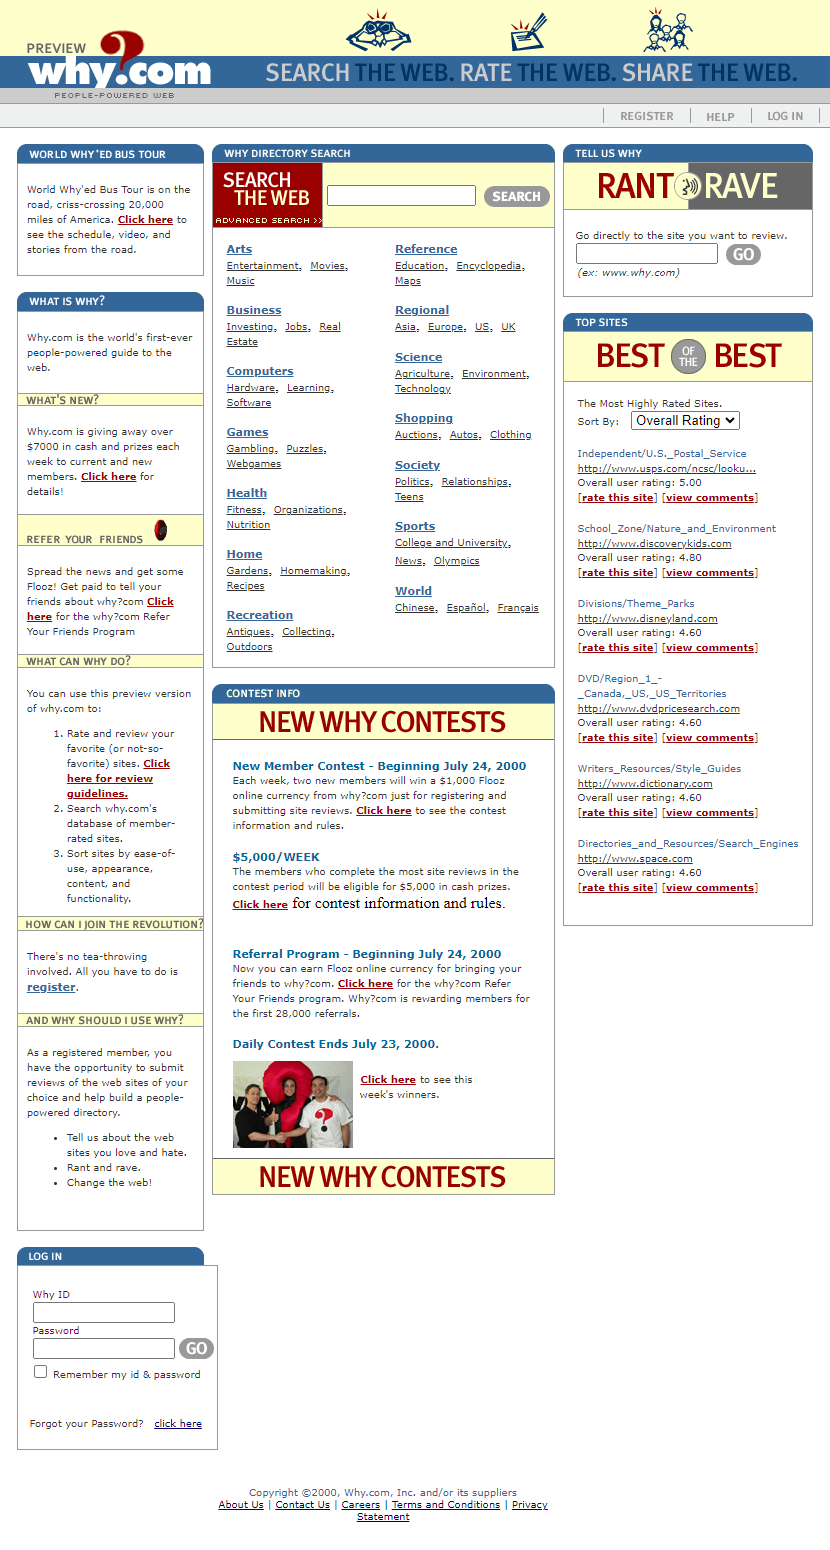 Why.com website in 2000